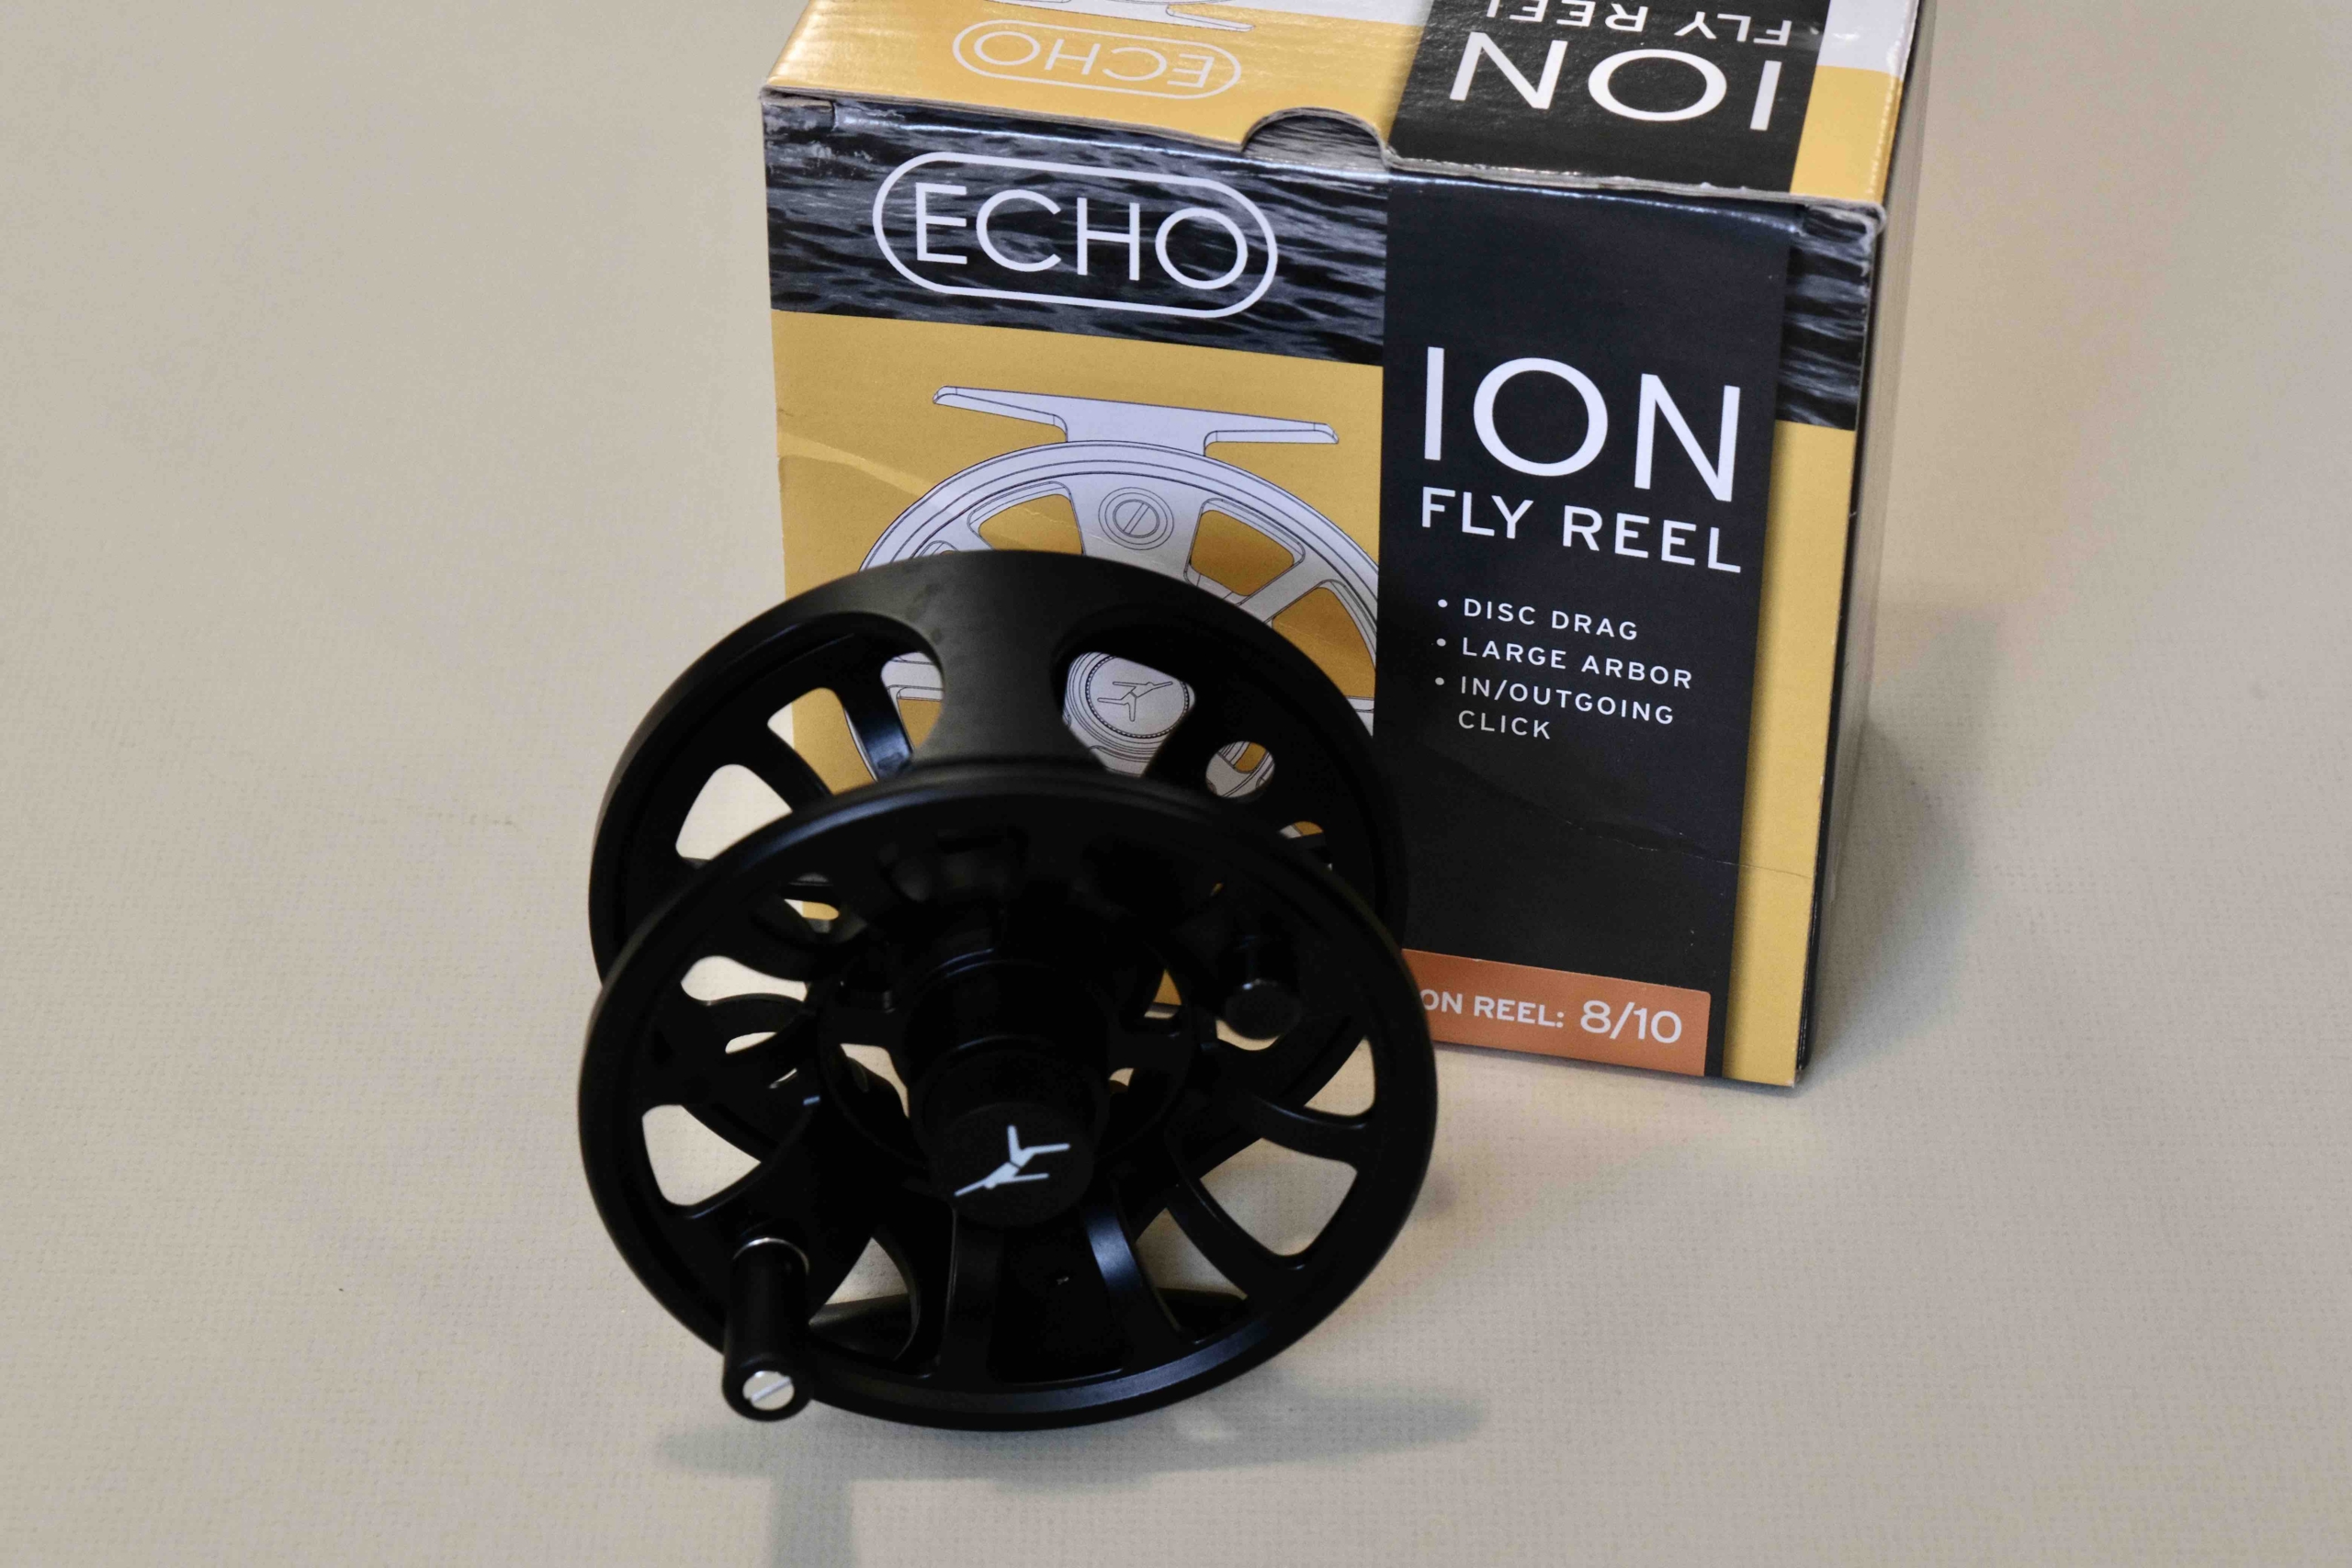 https://thefirstcast.ca/wp-content/uploads/2020/02/Echo-Ion-810-Fly-Reel-AA-scaled.jpg